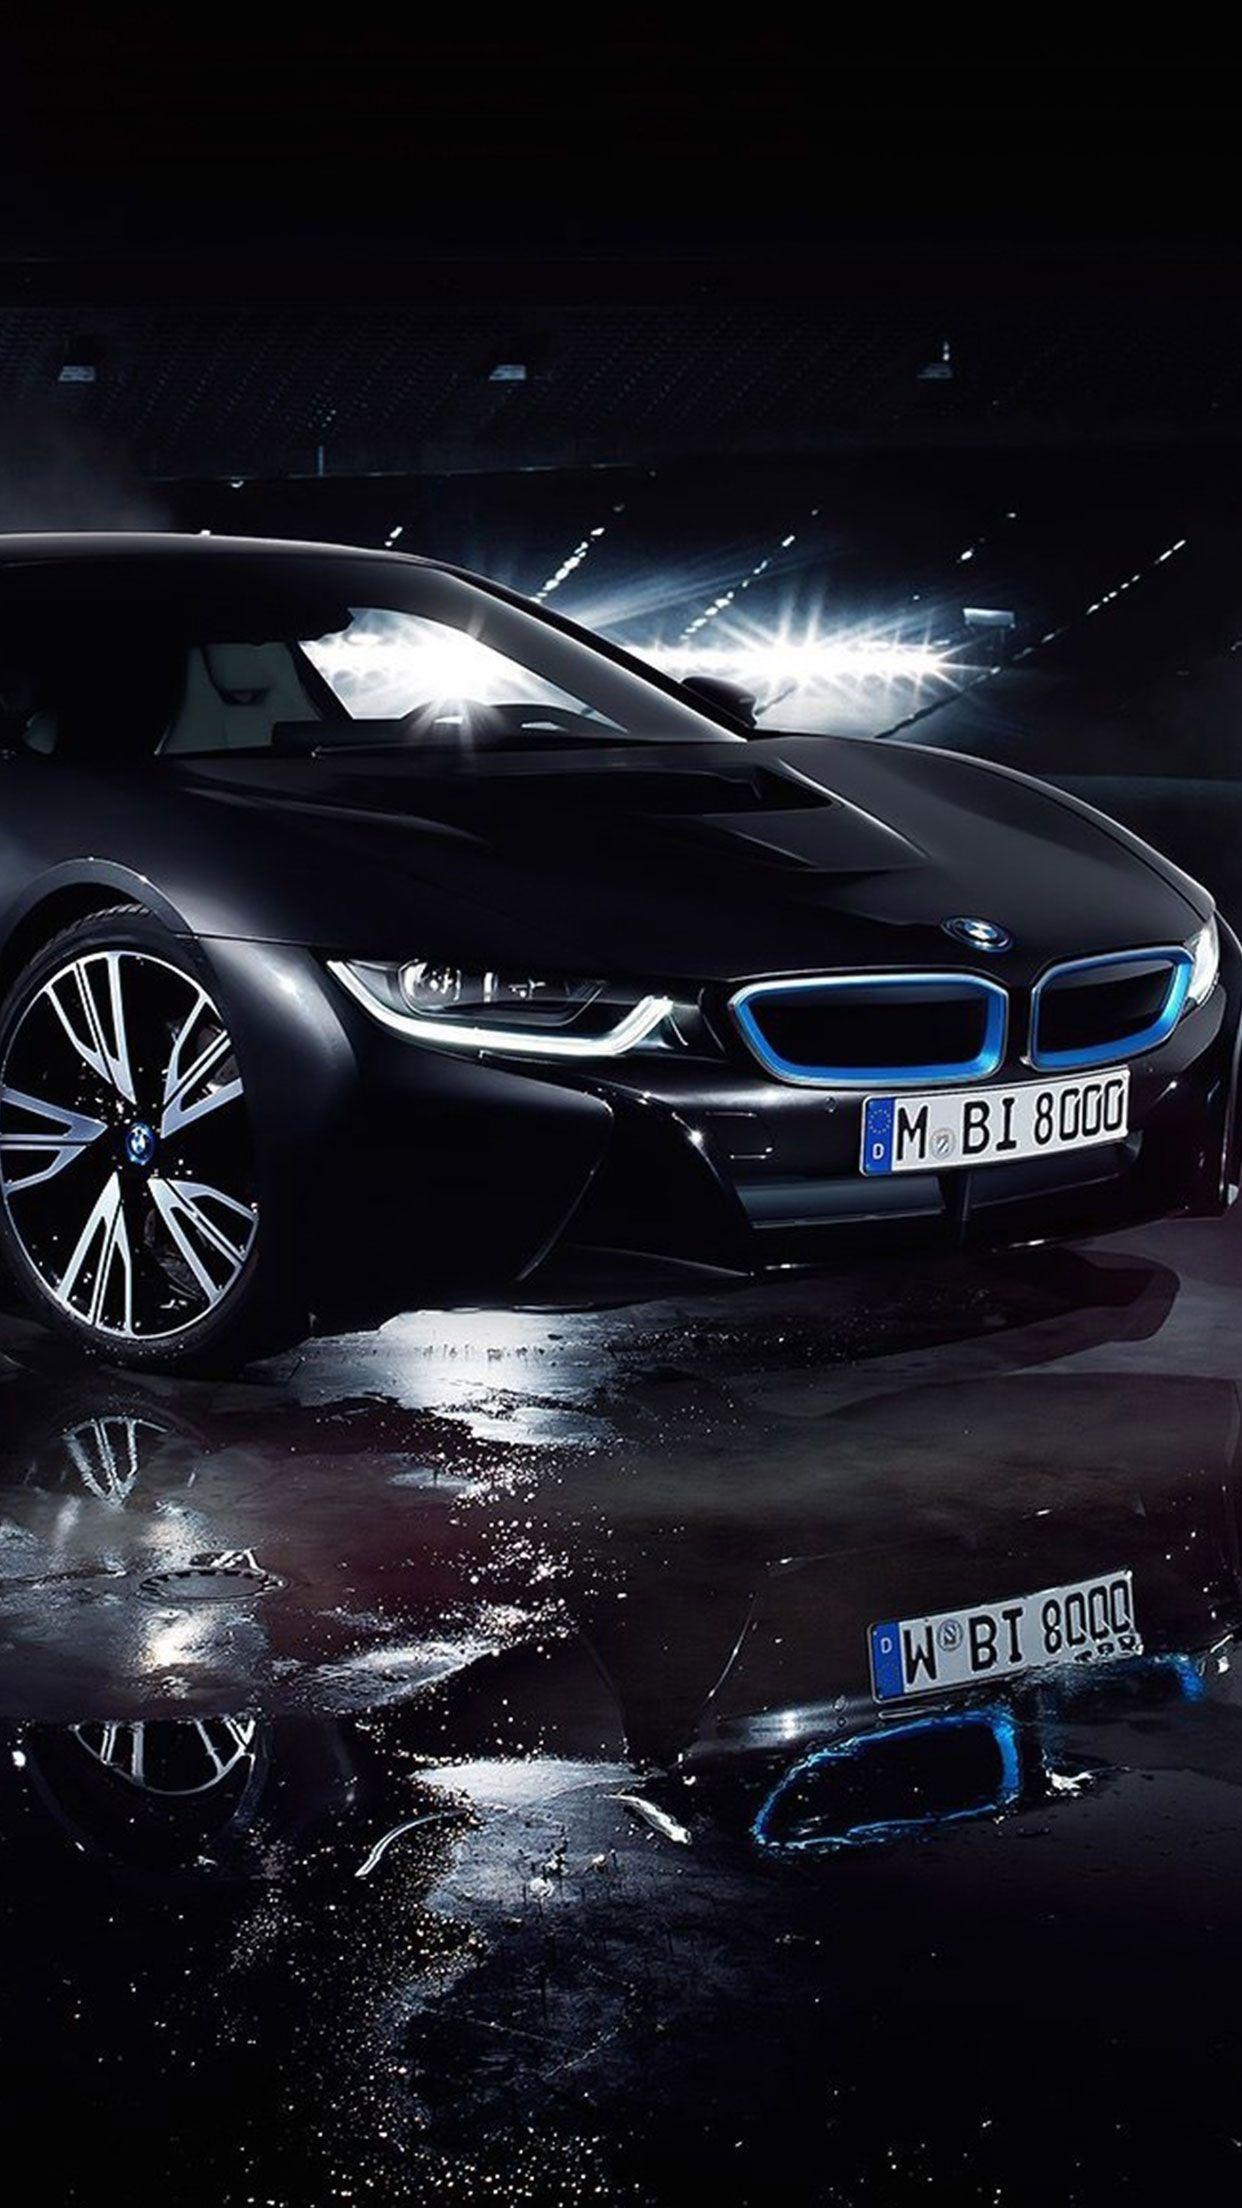 Best Of Bmw Hybrid Car Modified Wallpaper and Modified